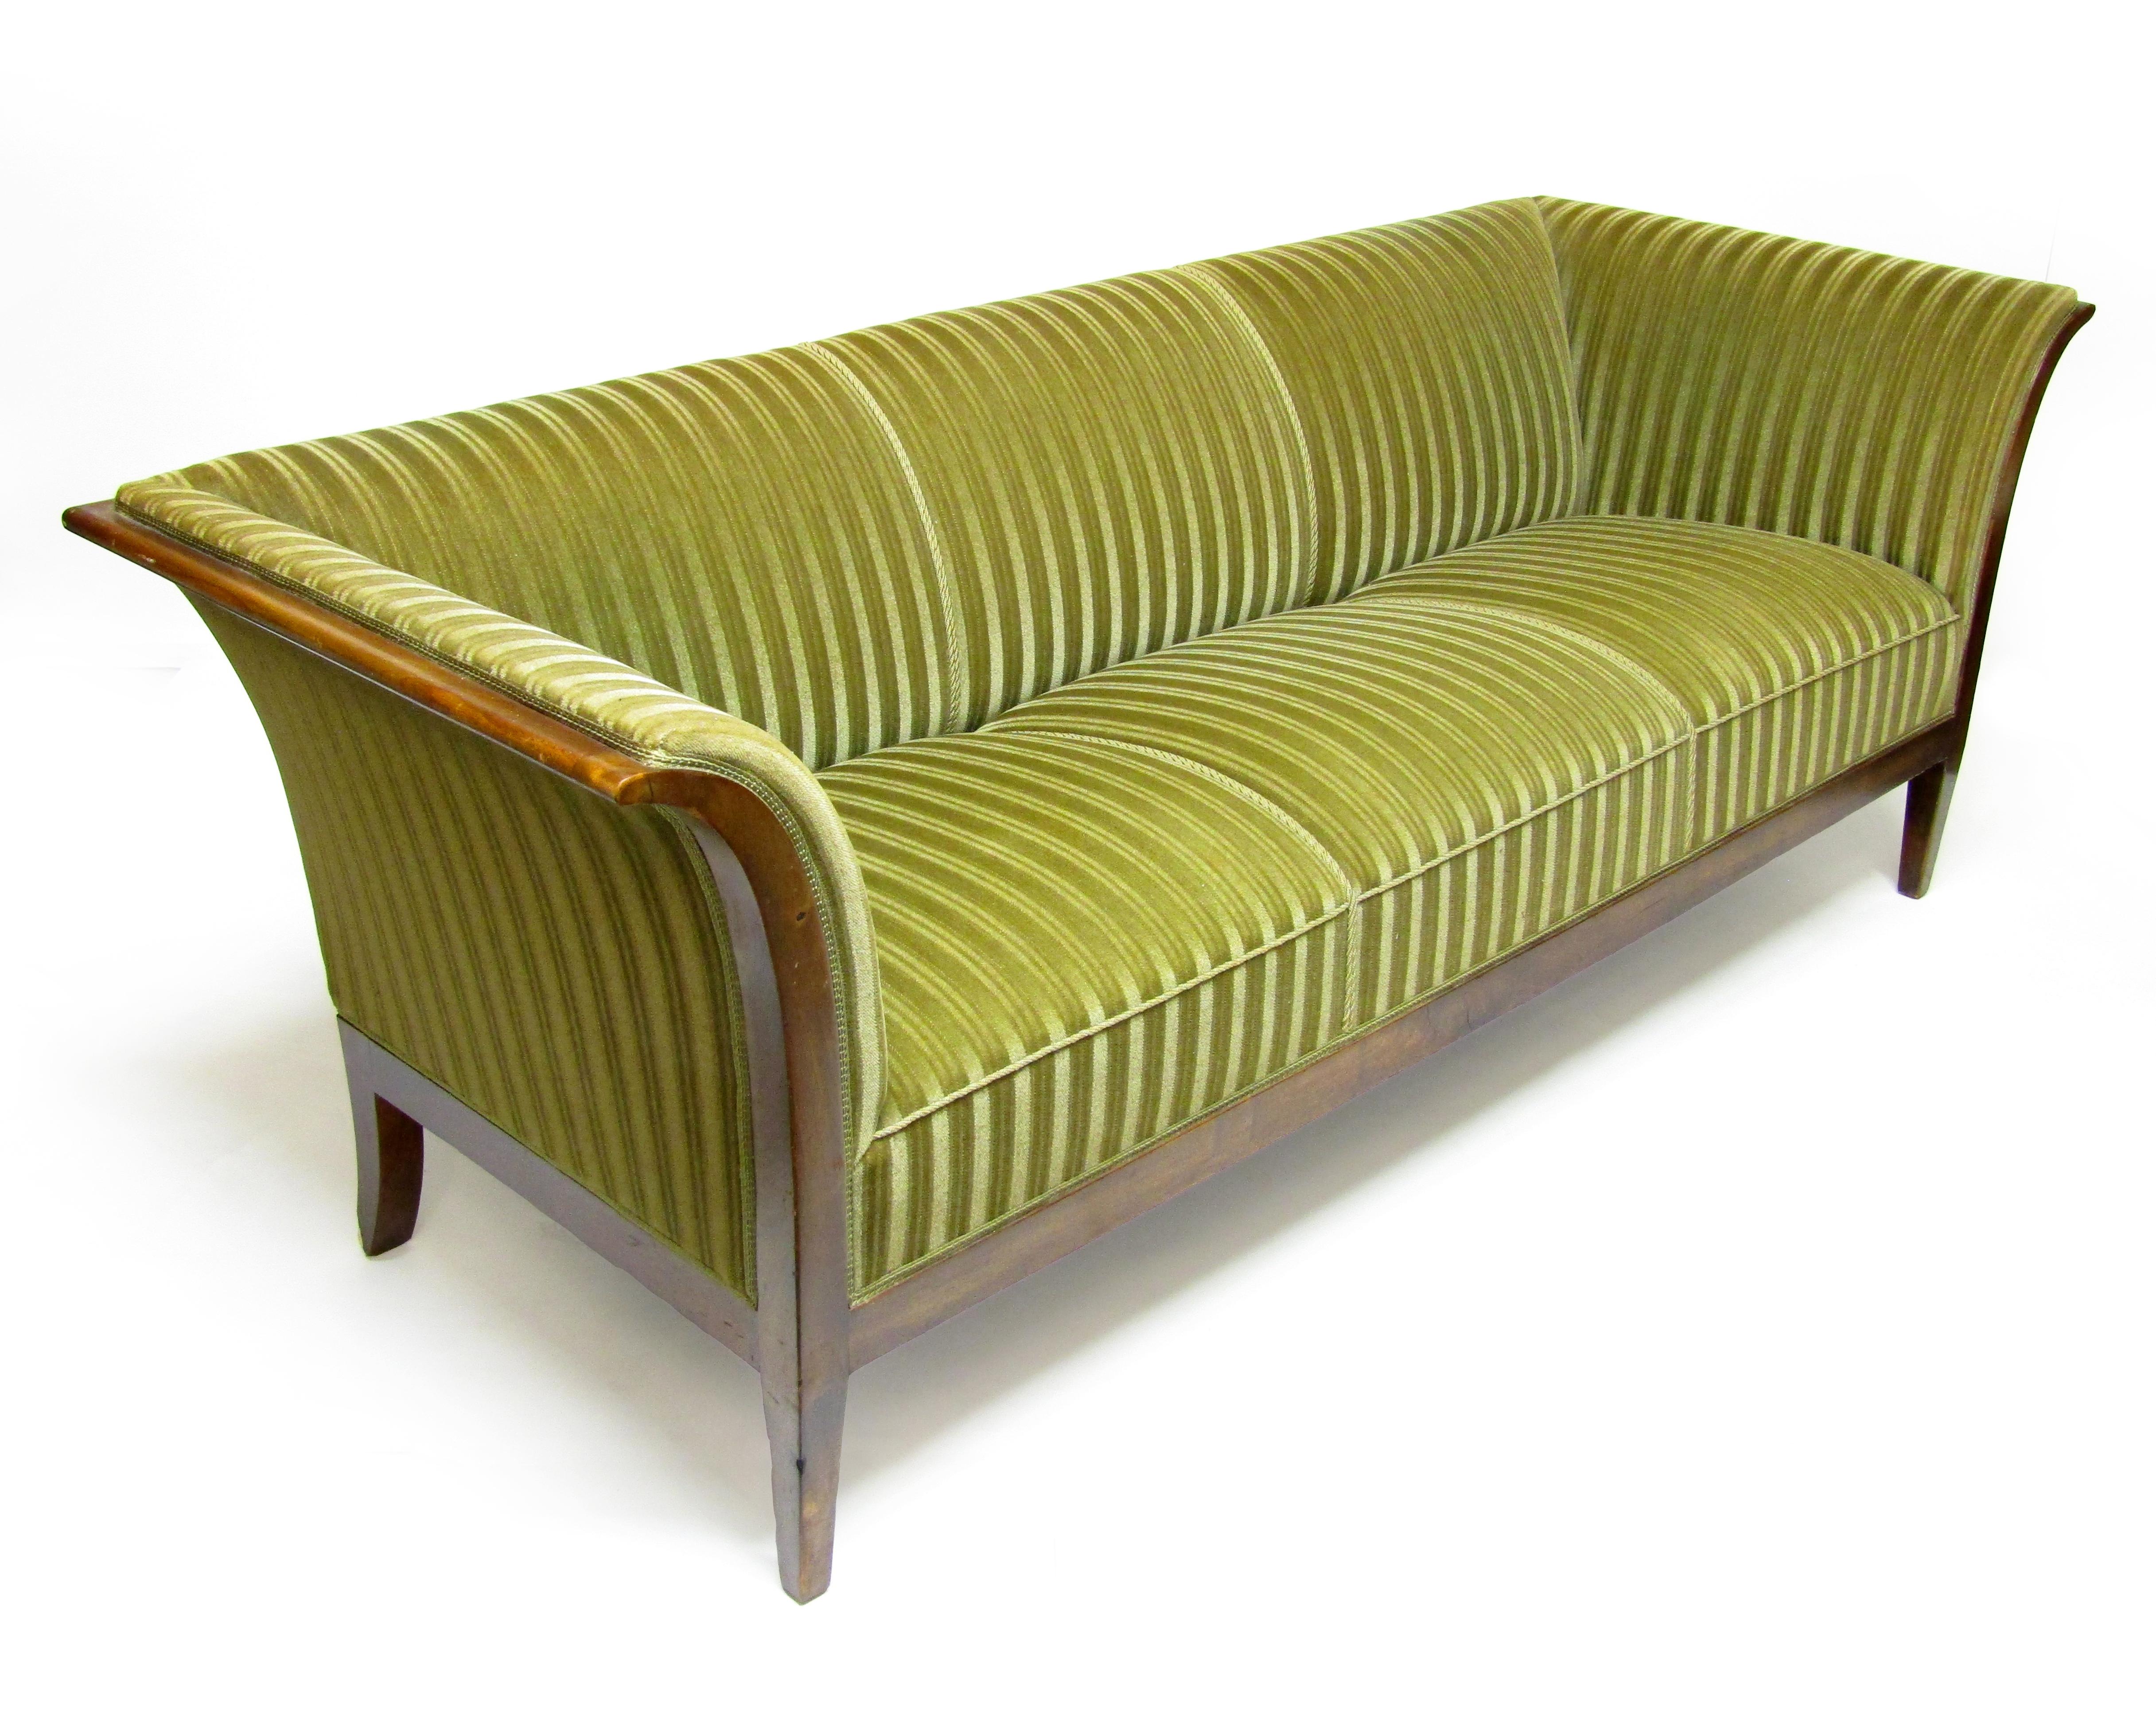 A striking 3-seater sofa in Cuban mahogany and green velvet fabric by Frits Henningsen.

In competition with his teacher Kaare Klint, Henningsen was one of the outstanding Danish designers of the early 20th century. A central aim was to modernise